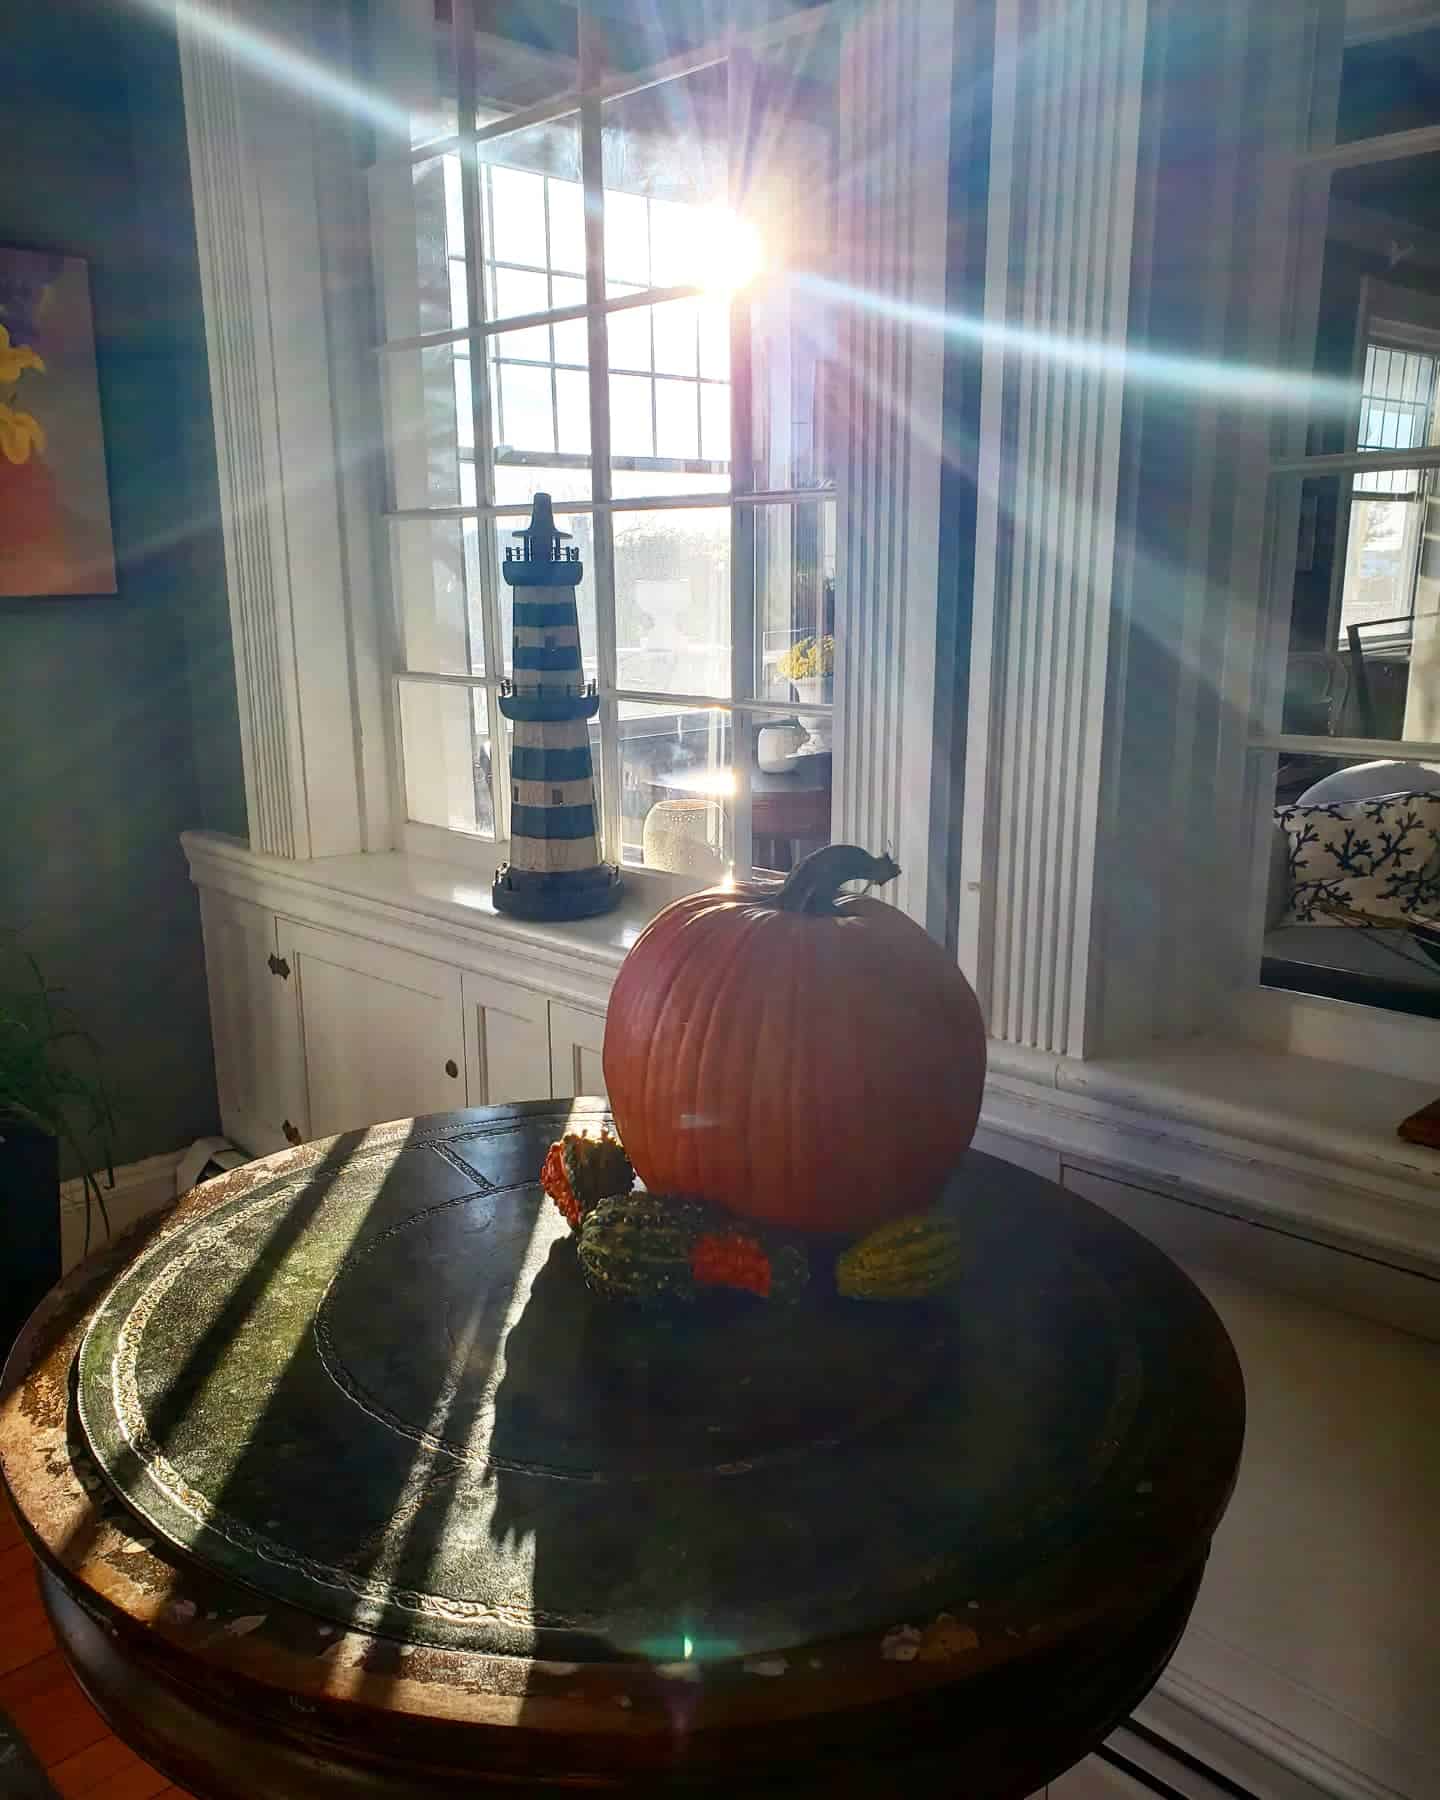 An orange pumpkin with other fall gourds sits on a circular table. Behind the pumpkin, the sun peeks through the window.